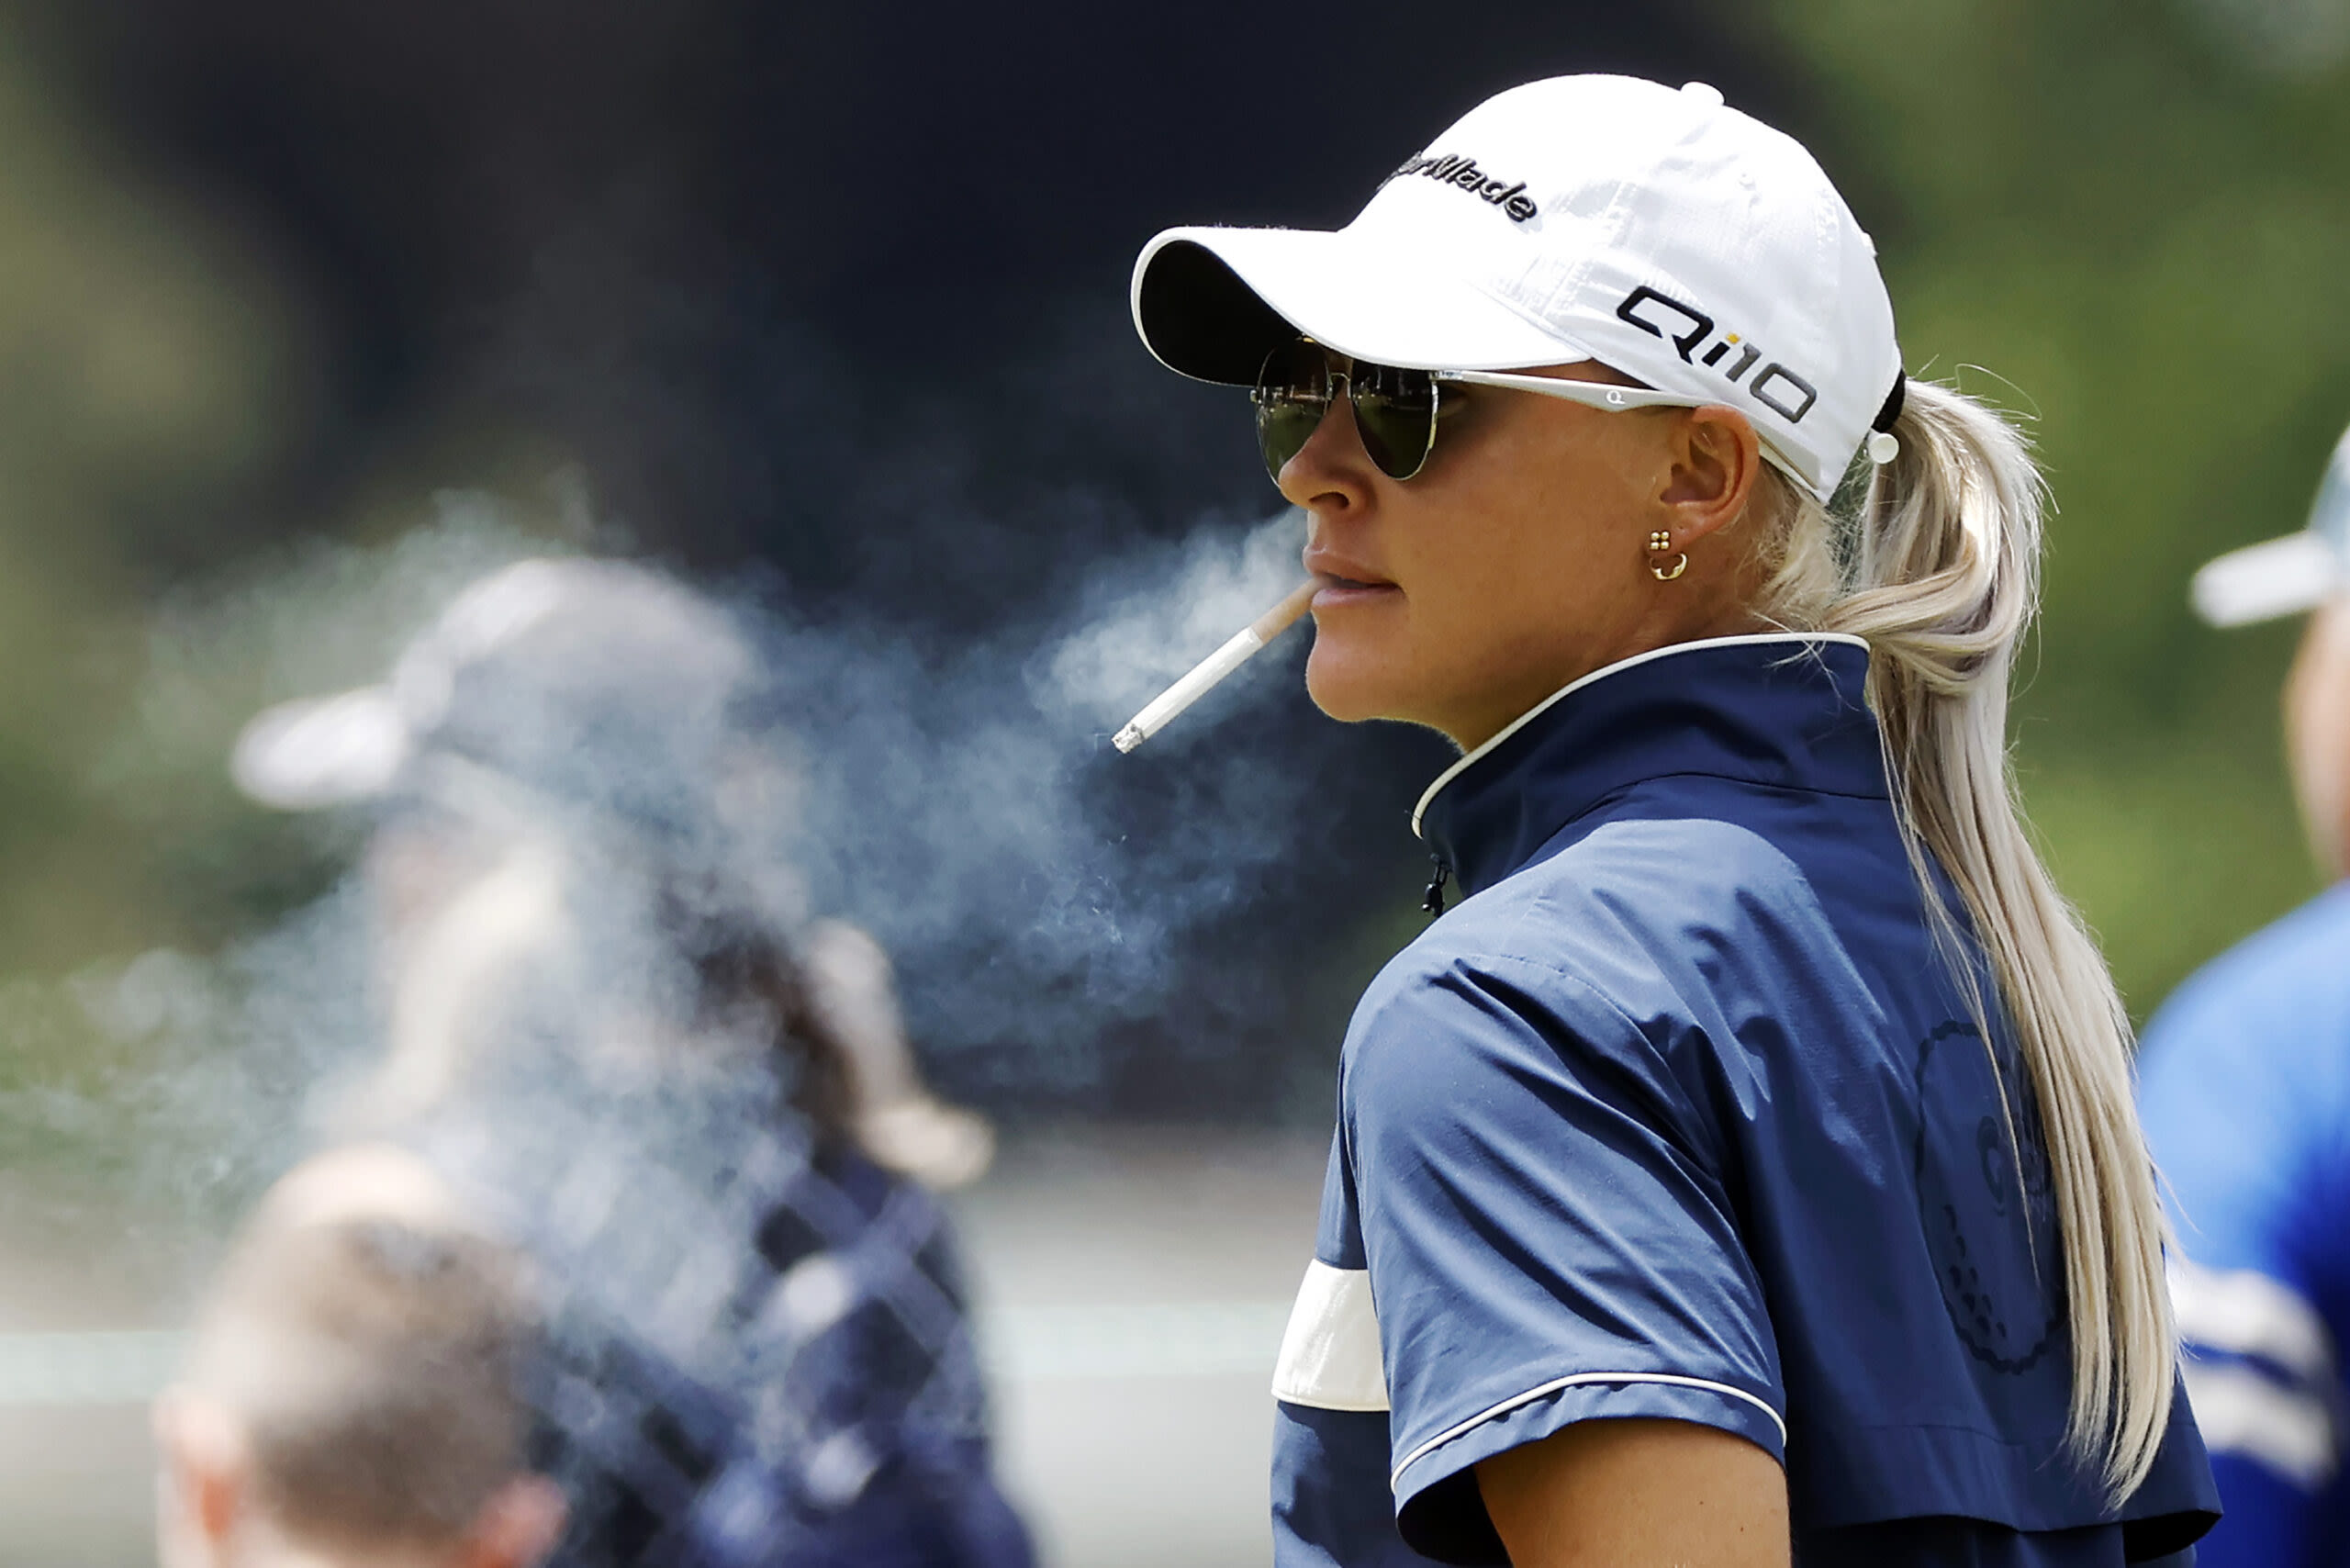 ‘I hate smoking’: Charley Hull talks about the habit she’d like to quit after viral moment at U.S. Women’s Open